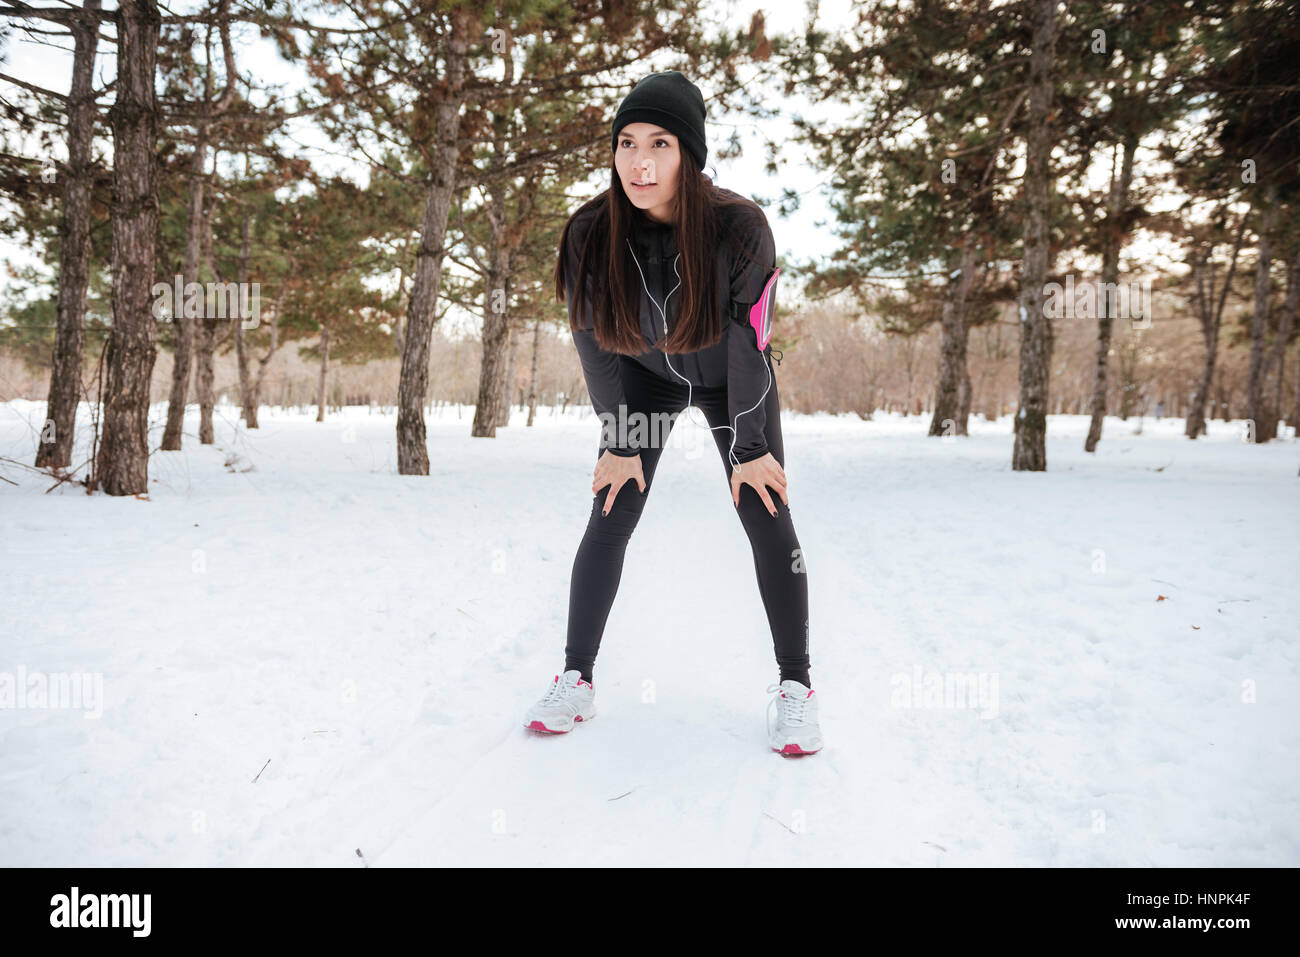 Female athlete exercising outside in cold weather on forest path wearing activewear Stock Photo